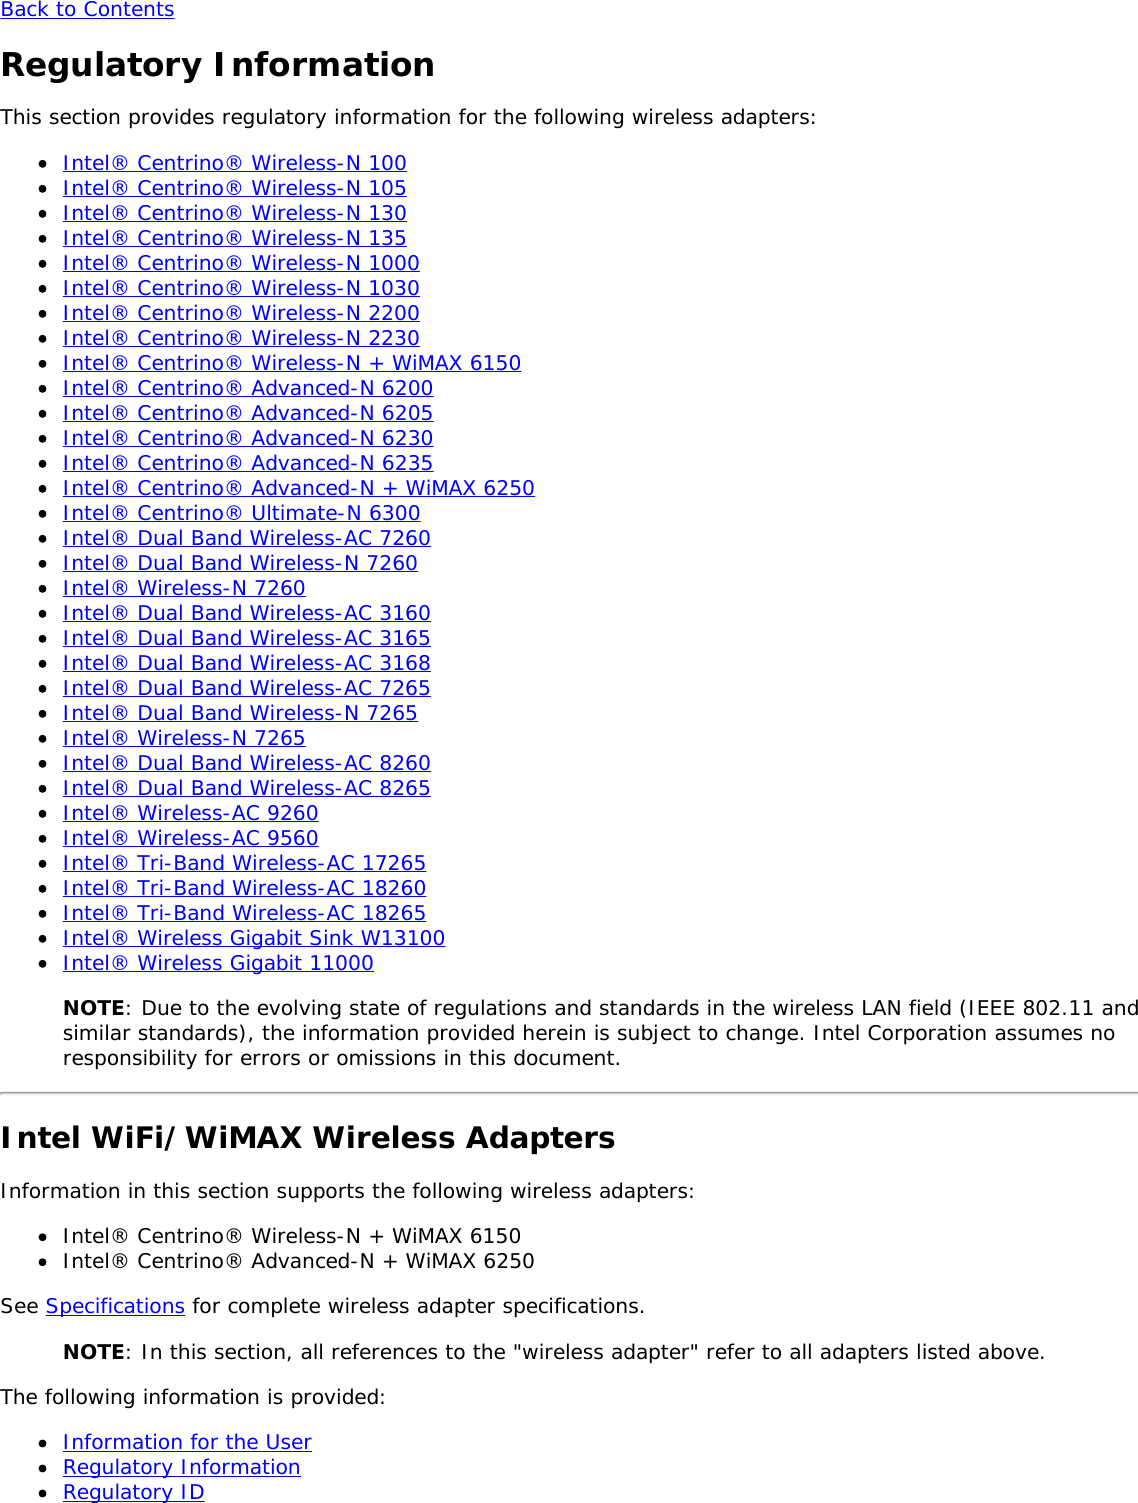 Back to ContentsRegulatory InformationThis section provides regulatory information for the following wireless adapters:Intel® Centrino® Wireless-N 100Intel® Centrino® Wireless-N 105Intel® Centrino® Wireless-N 130Intel® Centrino® Wireless-N 135Intel® Centrino® Wireless-N 1000Intel® Centrino® Wireless-N 1030Intel® Centrino® Wireless-N 2200Intel® Centrino® Wireless-N 2230Intel® Centrino® Wireless-N + WiMAX 6150Intel® Centrino® Advanced-N 6200Intel® Centrino® Advanced-N 6205Intel® Centrino® Advanced-N 6230Intel® Centrino® Advanced-N 6235Intel® Centrino® Advanced-N + WiMAX 6250Intel® Centrino® Ultimate-N 6300Intel® Dual Band Wireless-AC 7260Intel® Dual Band Wireless-N 7260Intel® Wireless-N 7260Intel® Dual Band Wireless-AC 3160Intel® Dual Band Wireless-AC 3165Intel® Dual Band Wireless-AC 3168Intel® Dual Band Wireless-AC 7265Intel® Dual Band Wireless-N 7265Intel® Wireless-N 7265Intel® Dual Band Wireless-AC 8260Intel® Dual Band Wireless-AC 8265Intel® Wireless-AC 9260Intel® Wireless-AC 9560Intel® Tri-Band Wireless-AC 17265Intel® Tri-Band Wireless-AC 18260Intel® Tri-Band Wireless-AC 18265Intel® Wireless Gigabit Sink W13100Intel® Wireless Gigabit 11000NOTE: Due to the evolving state of regulations and standards in the wireless LAN field (IEEE 802.11 andsimilar standards), the information provided herein is subject to change. Intel Corporation assumes noresponsibility for errors or omissions in this document.Intel WiFi/WiMAX Wireless AdaptersInformation in this section supports the following wireless adapters:Intel® Centrino® Wireless-N + WiMAX 6150Intel® Centrino® Advanced-N + WiMAX 6250See Specifications for complete wireless adapter specifications.NOTE: In this section, all references to the &quot;wireless adapter&quot; refer to all adapters listed above.The following information is provided:Information for the UserRegulatory InformationRegulatory ID